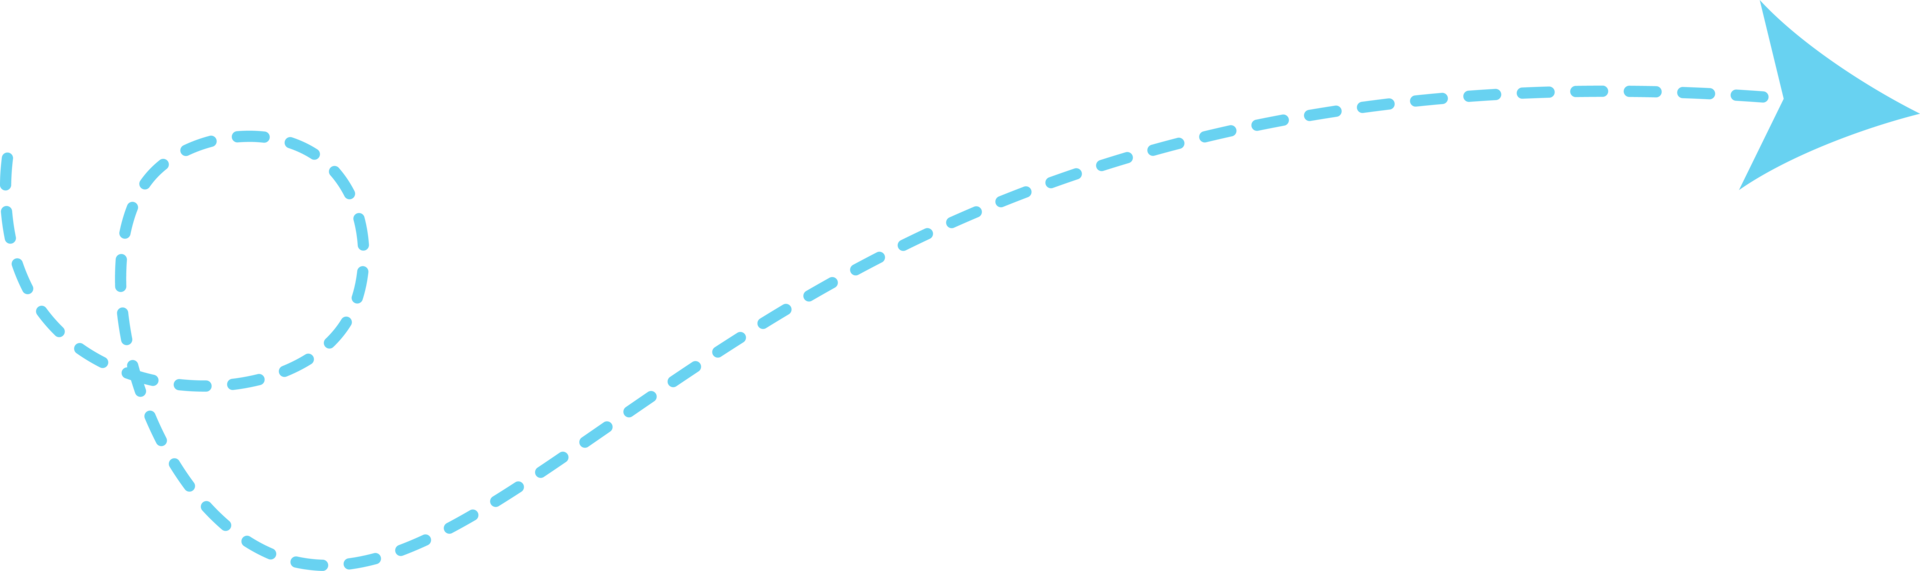 Dashed Line Arrow png